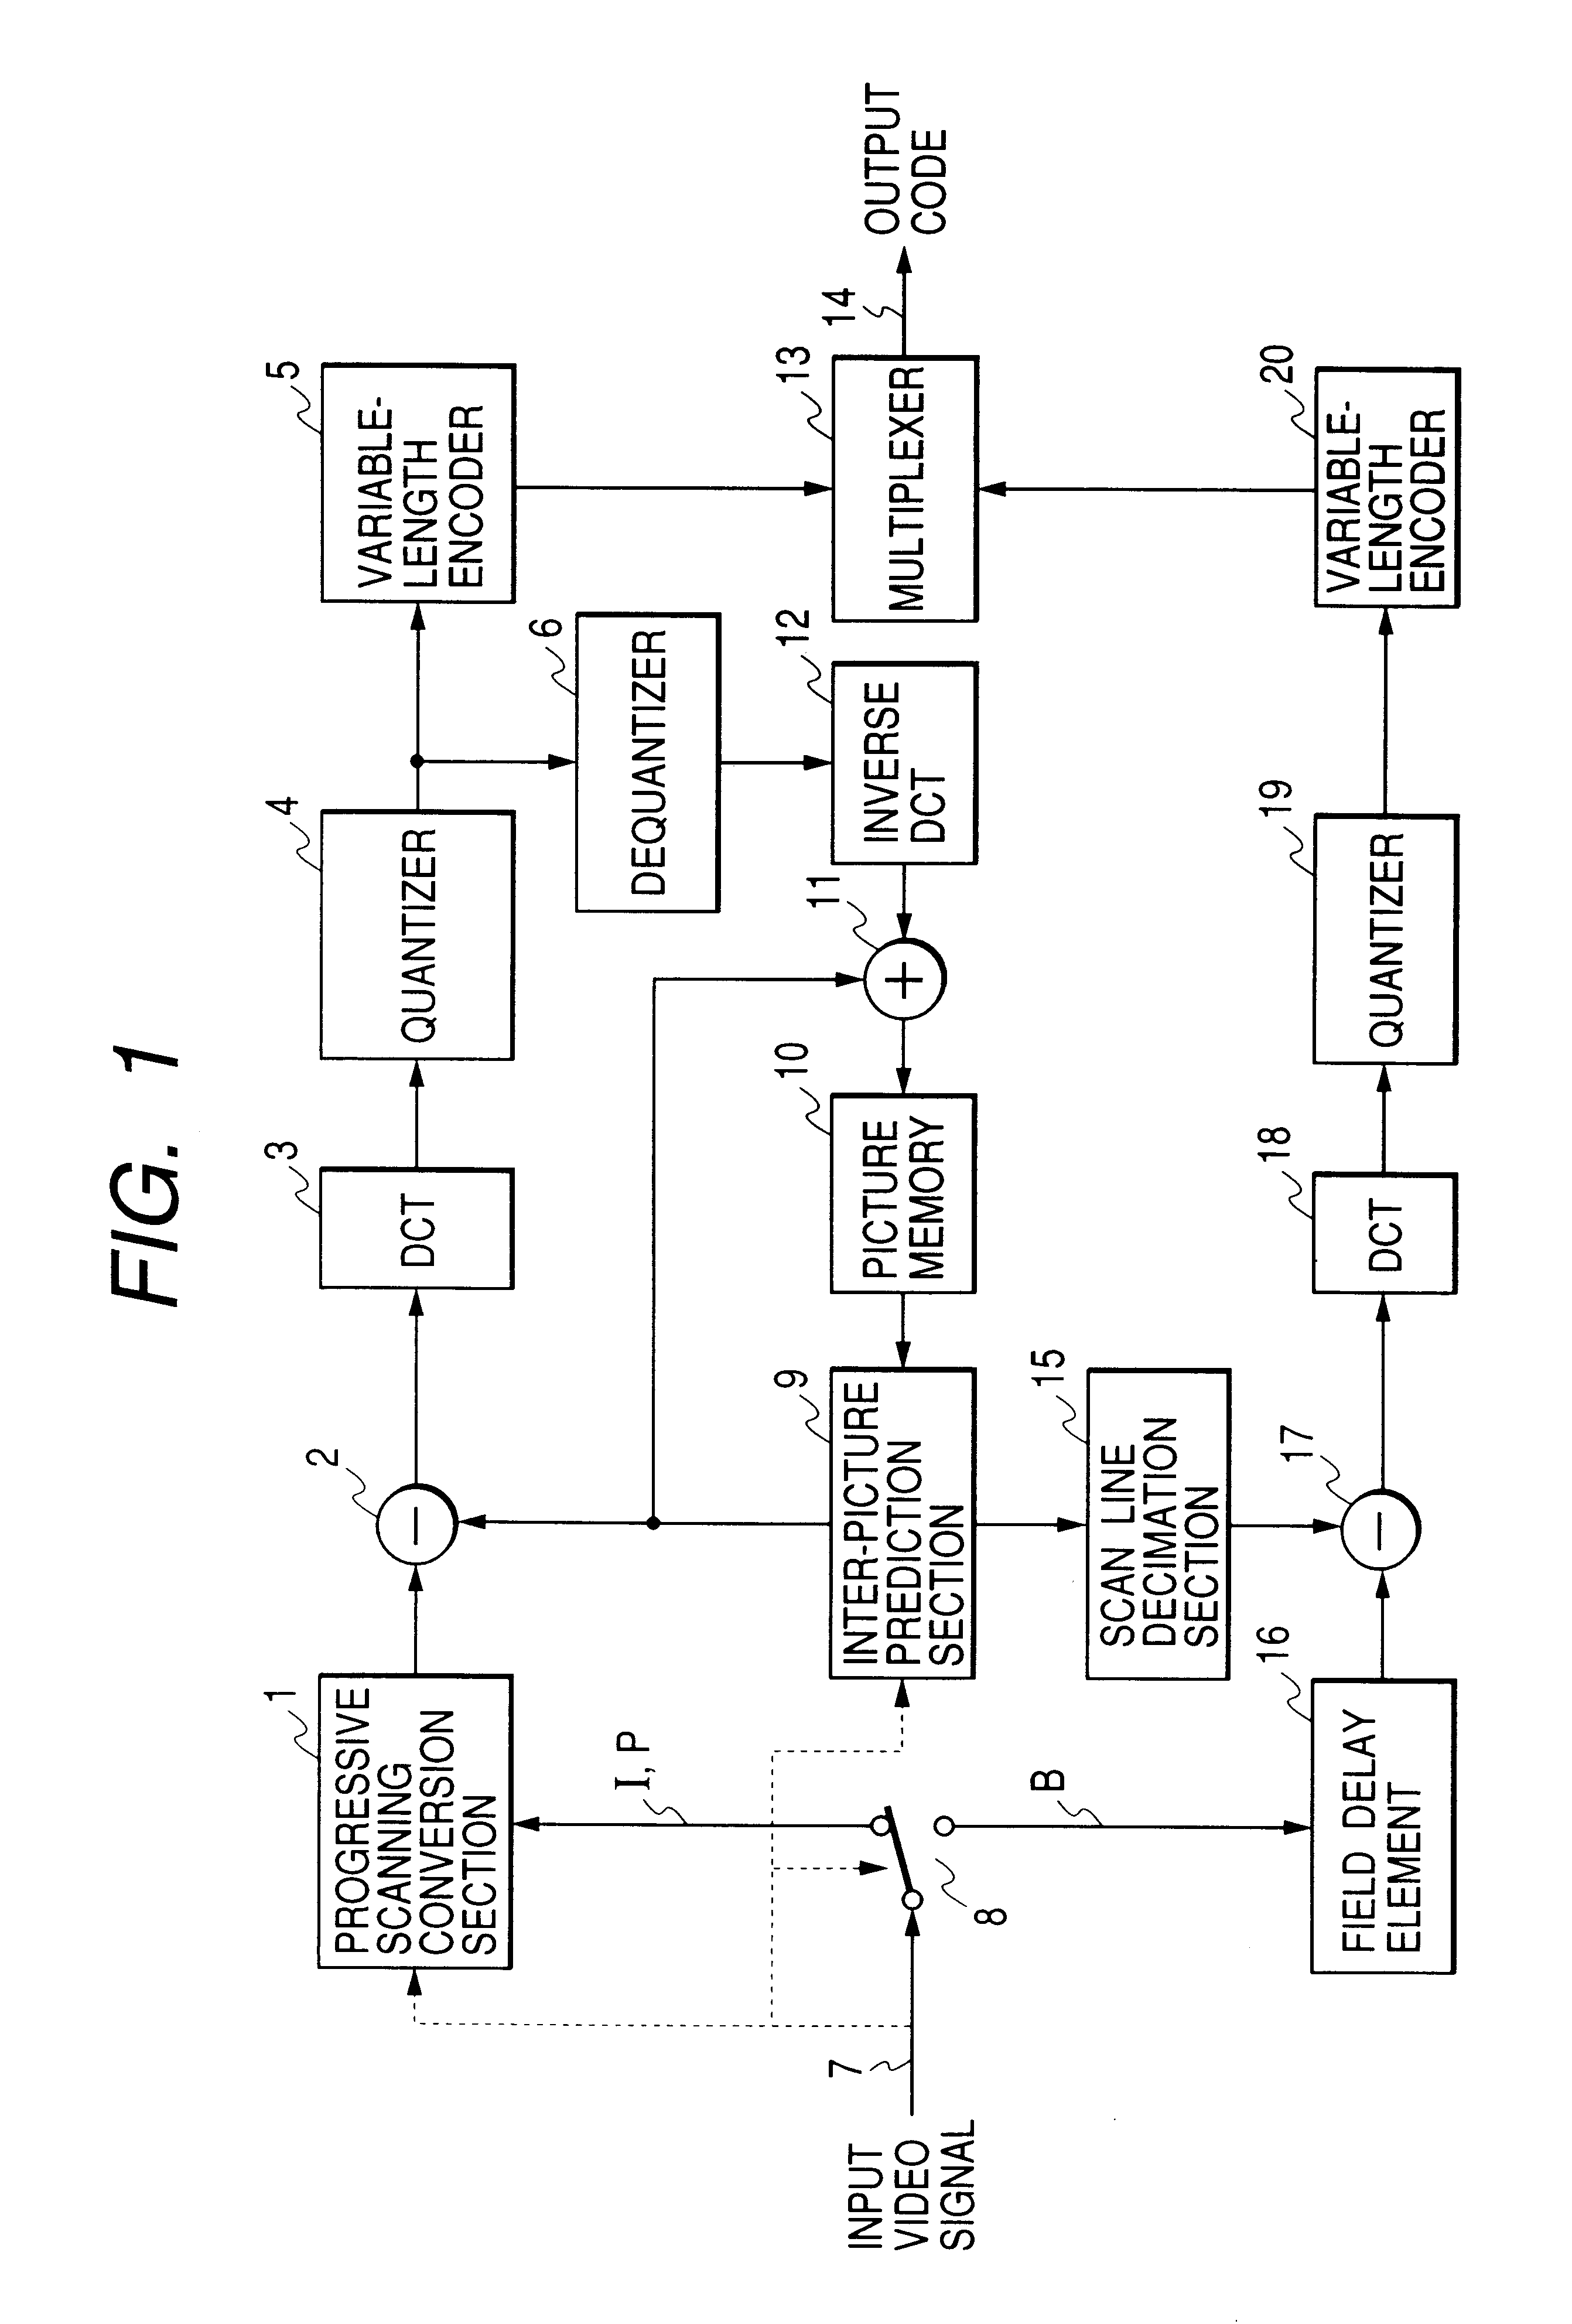 Interplaced video signal encoding and decoding method, and encoding apparatus and decoding apparatus utilizing the method, providing high efficiency of encoding by conversion of periodically selected fields to progressive scan frames which function as reference frames for predictive encoding